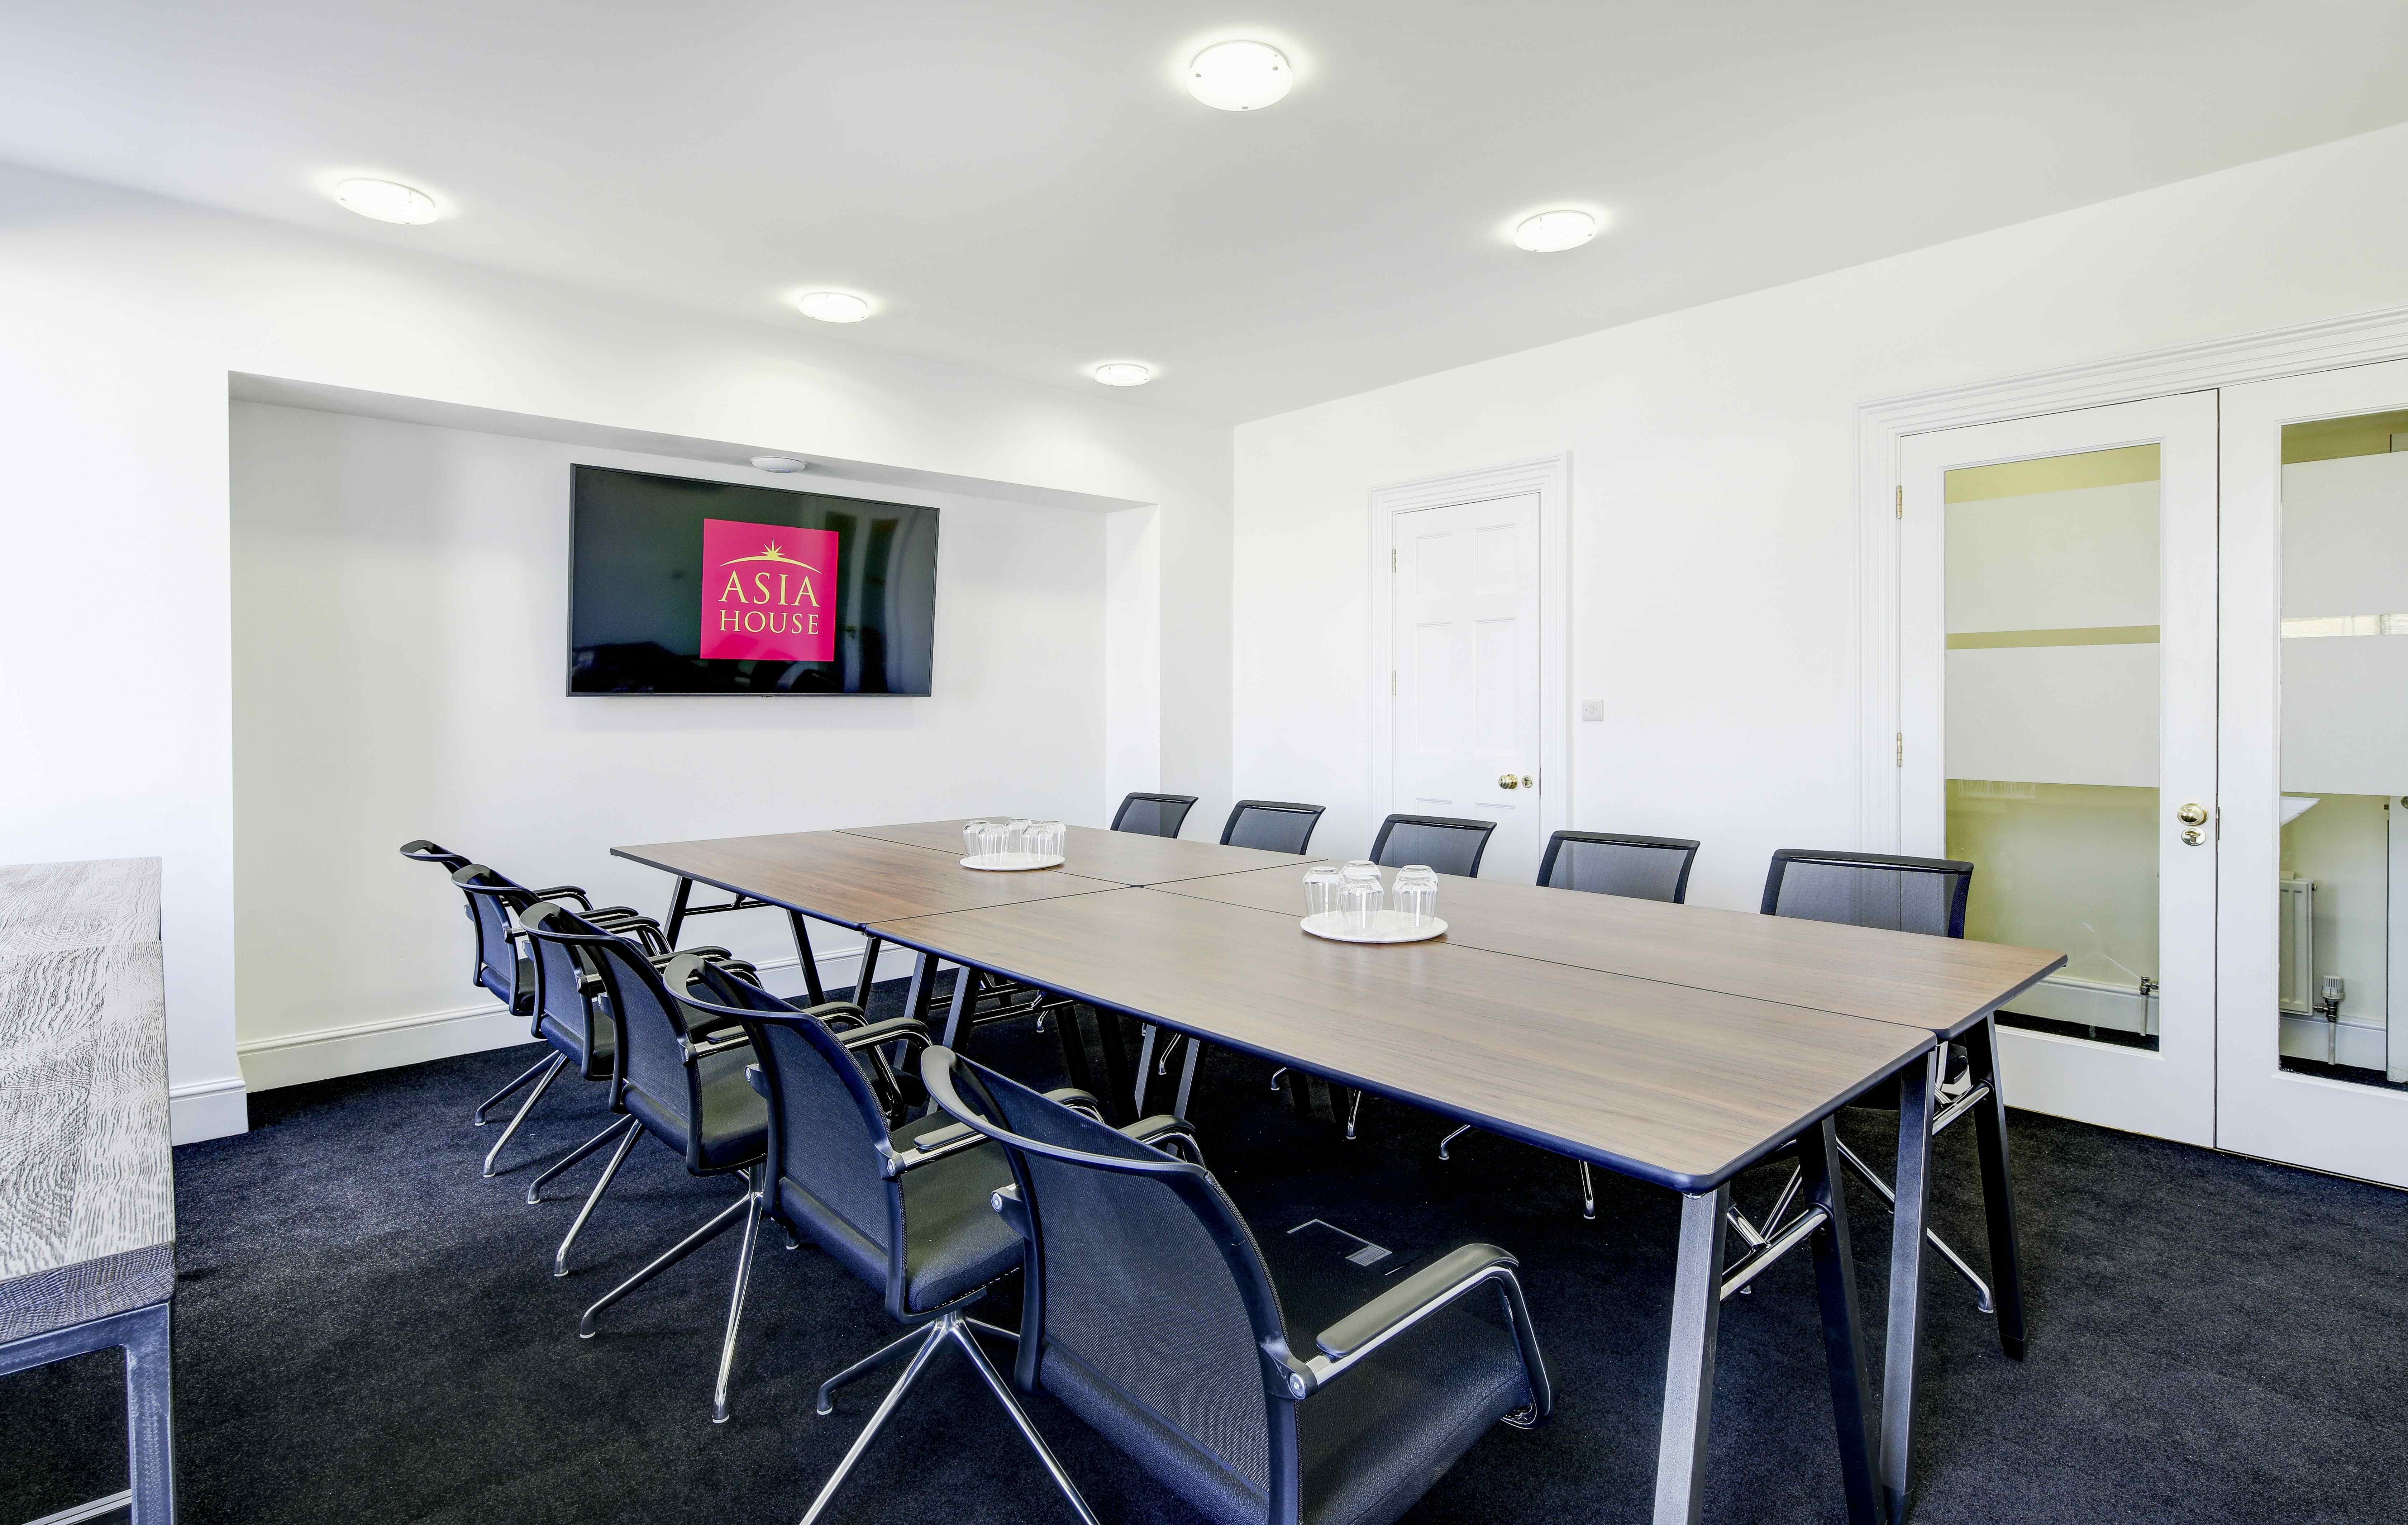 Boardroom, Asia House